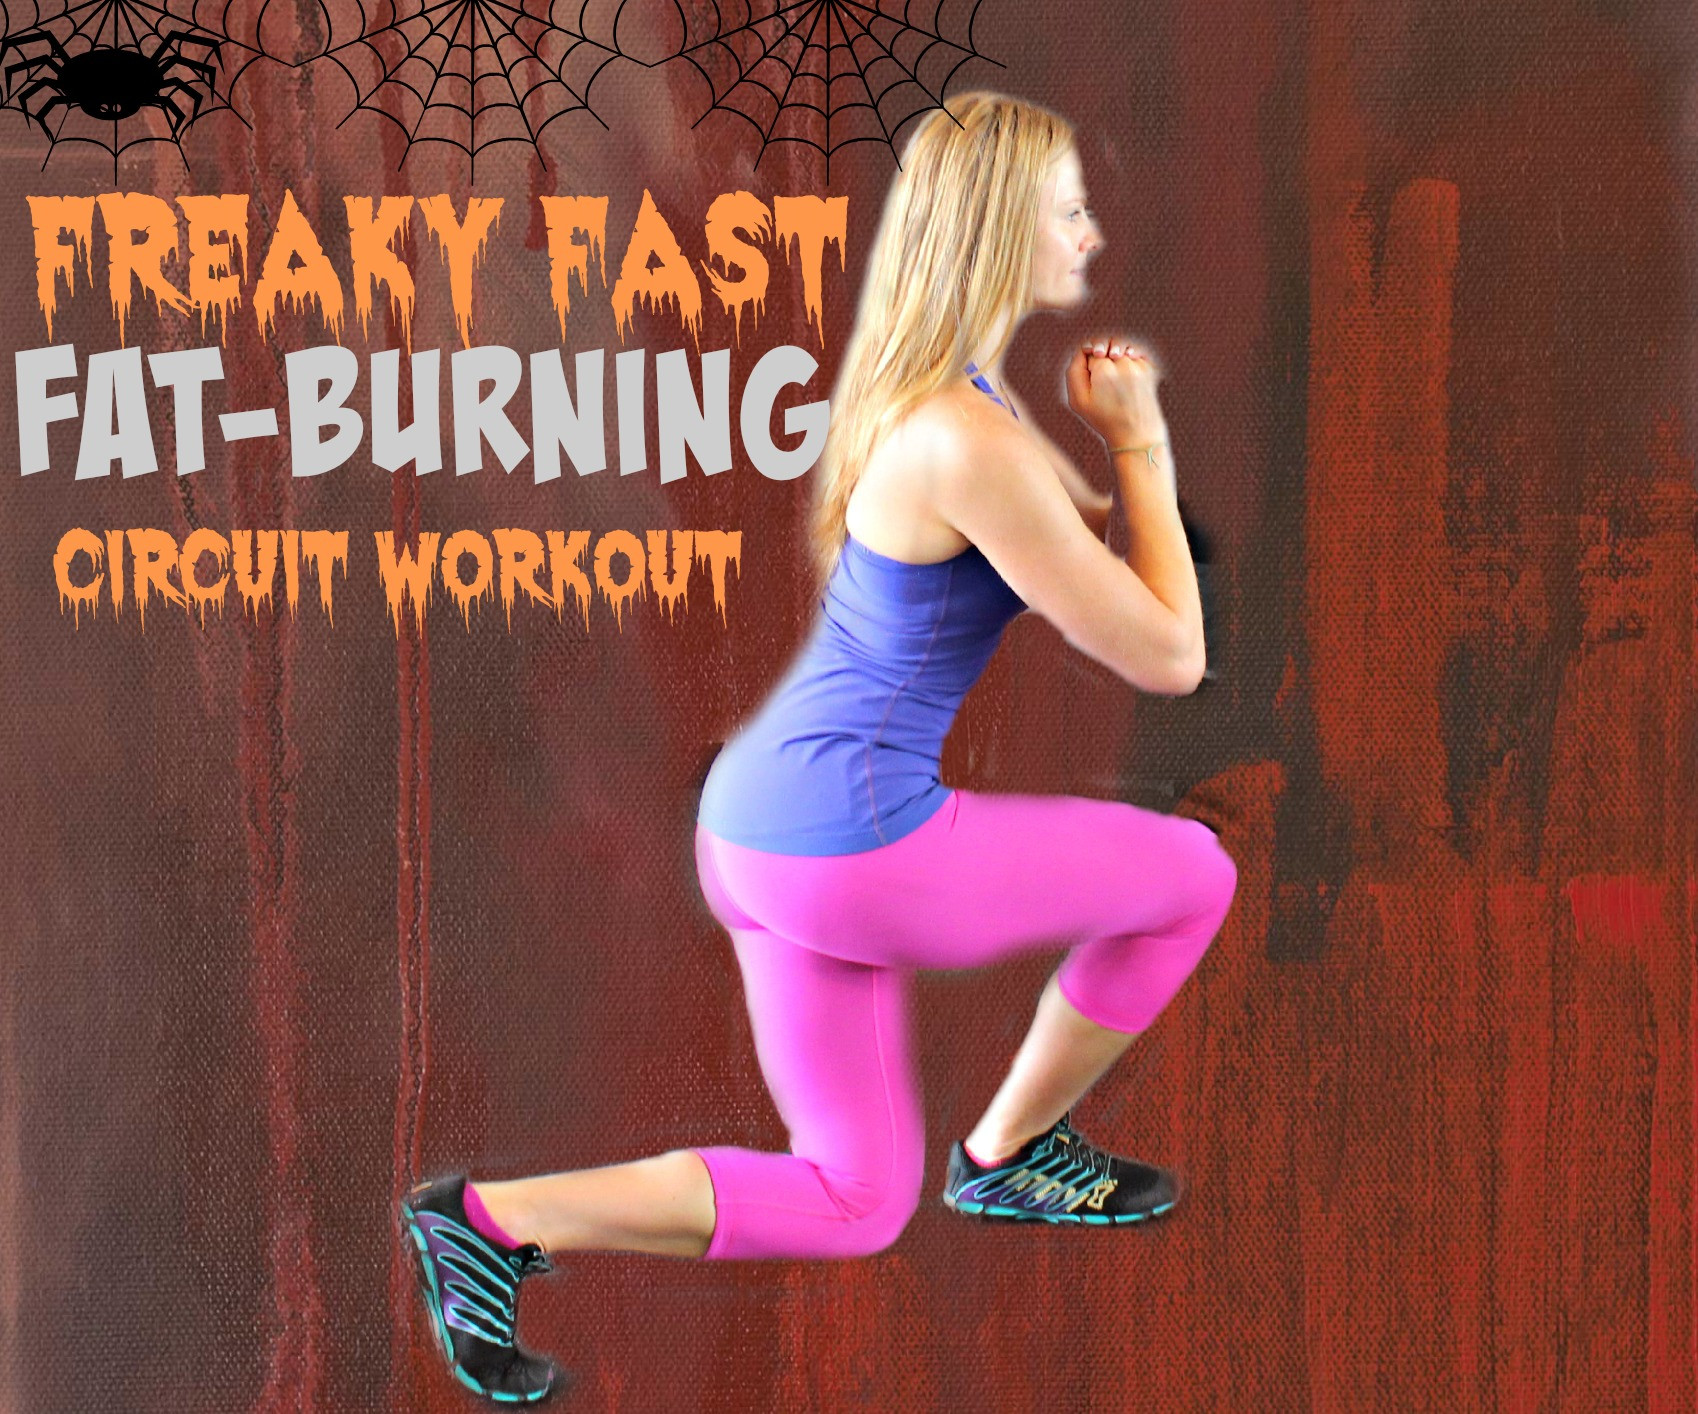 Fast Fat Burning Workout
 Freaky Fast Fat Burning Circuit Workout No Equipment